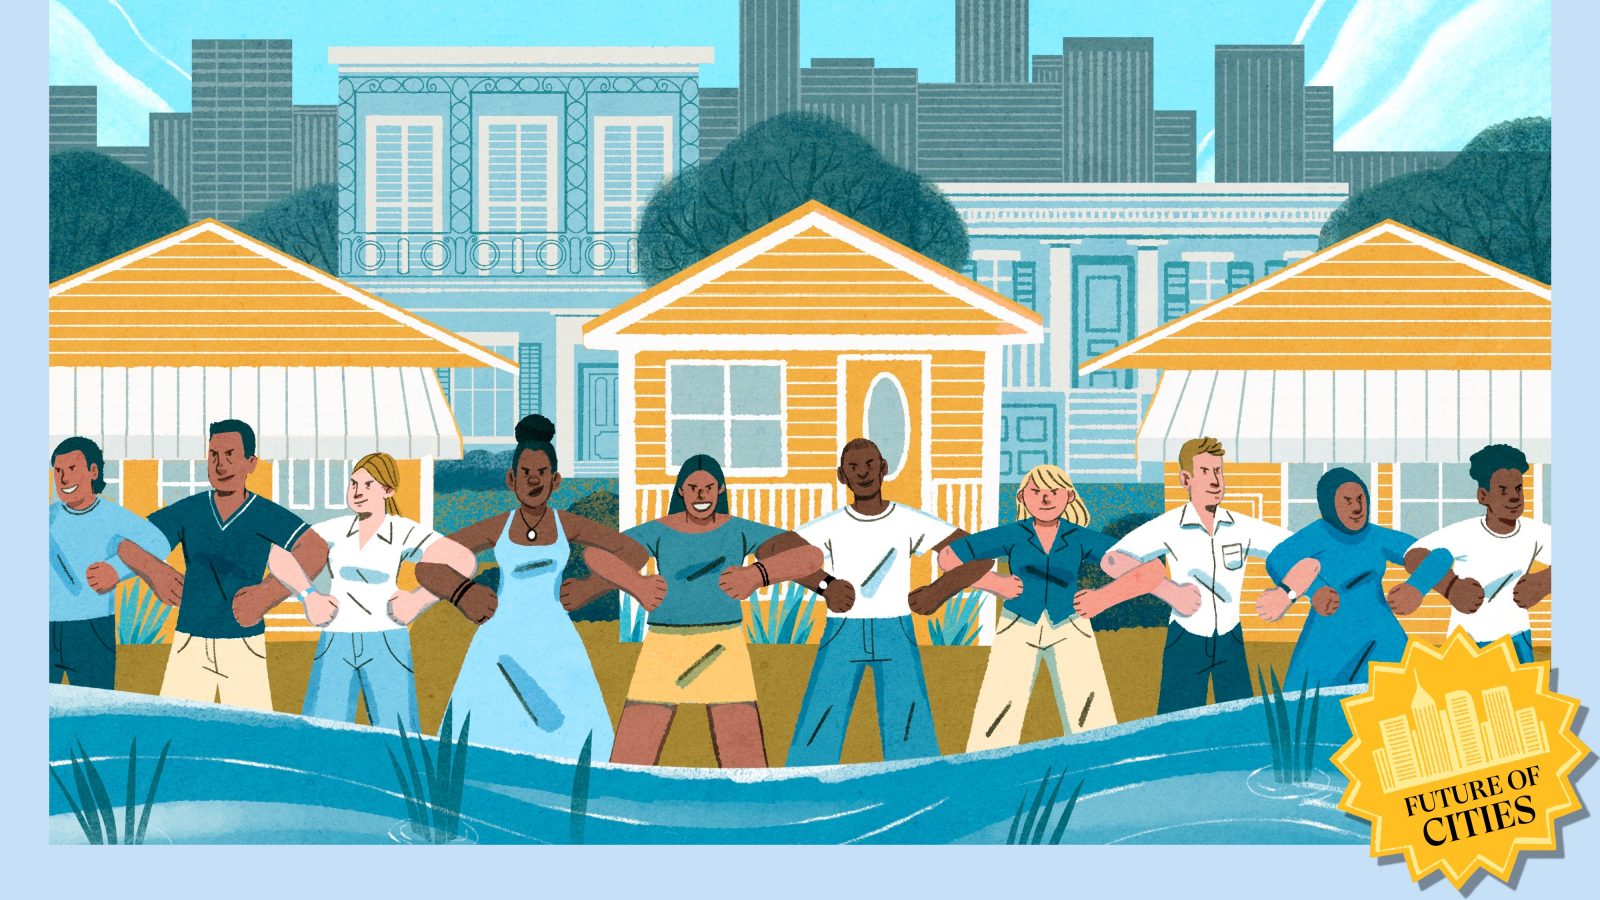 Illustration of coastal residents standing with locked arms, protecting their communities